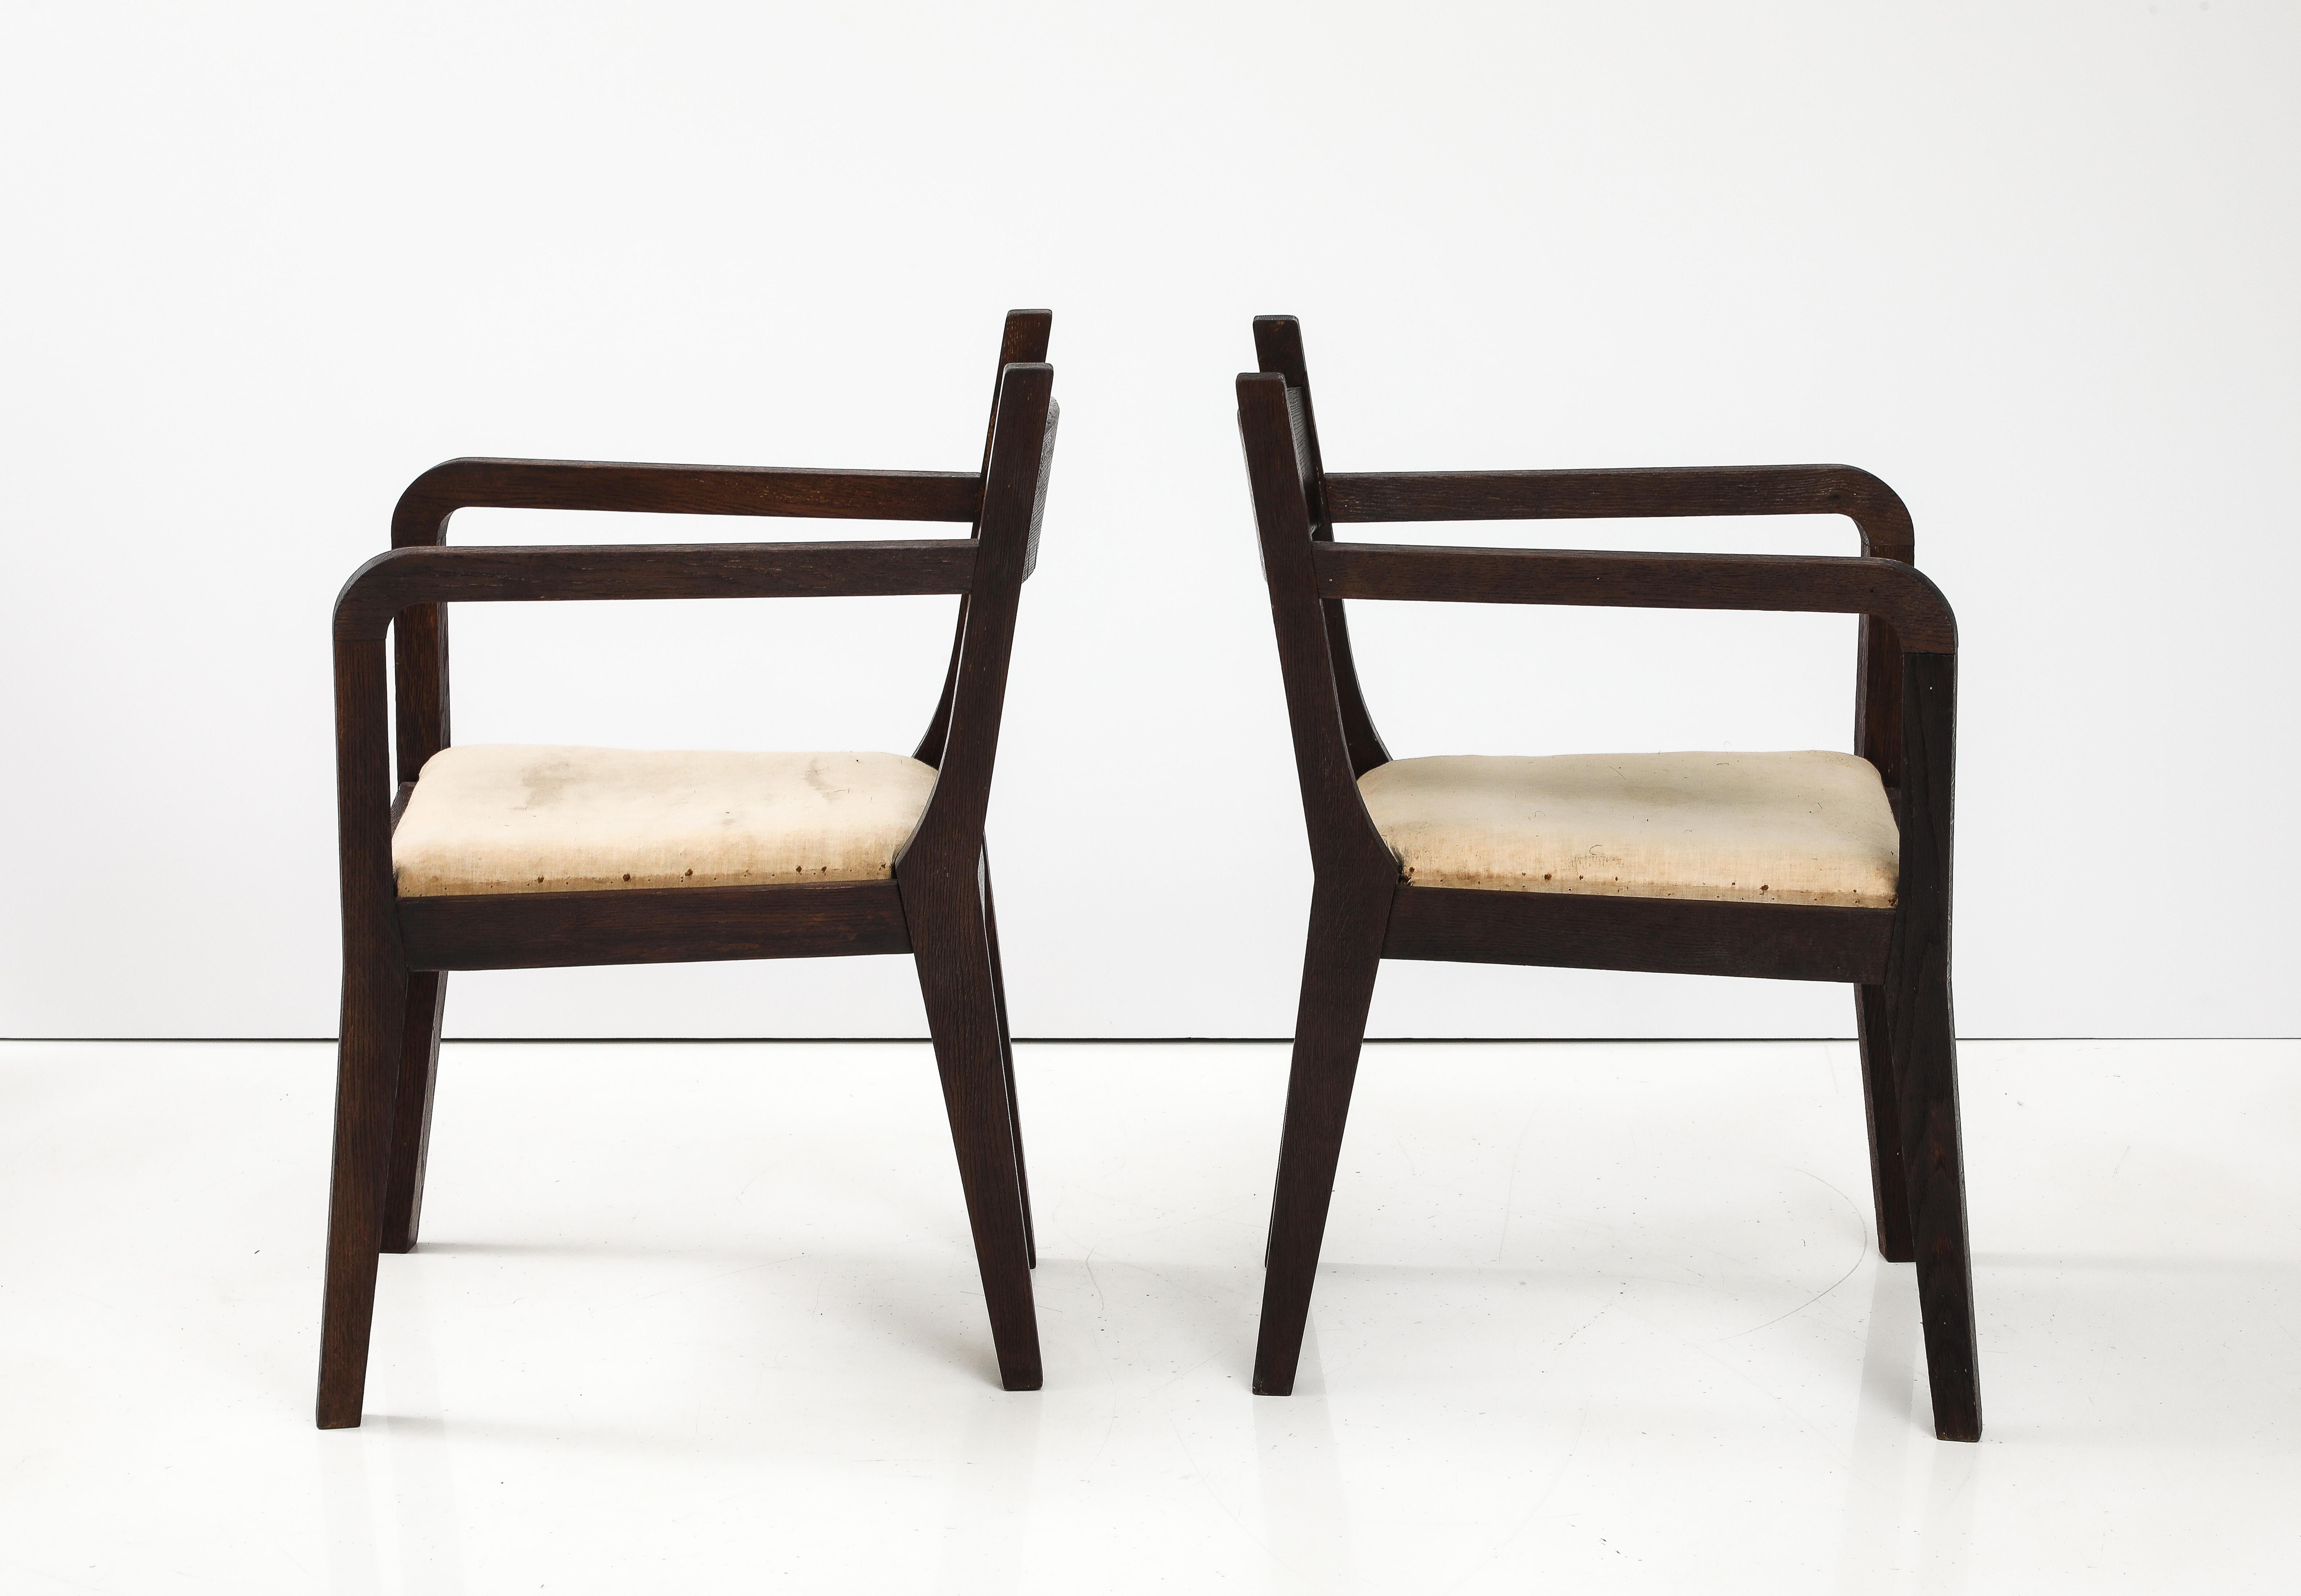 Pair of Modernist Eyre de Lanux Armchairs in Brushed Oak, France, c. 1925 For Sale 6